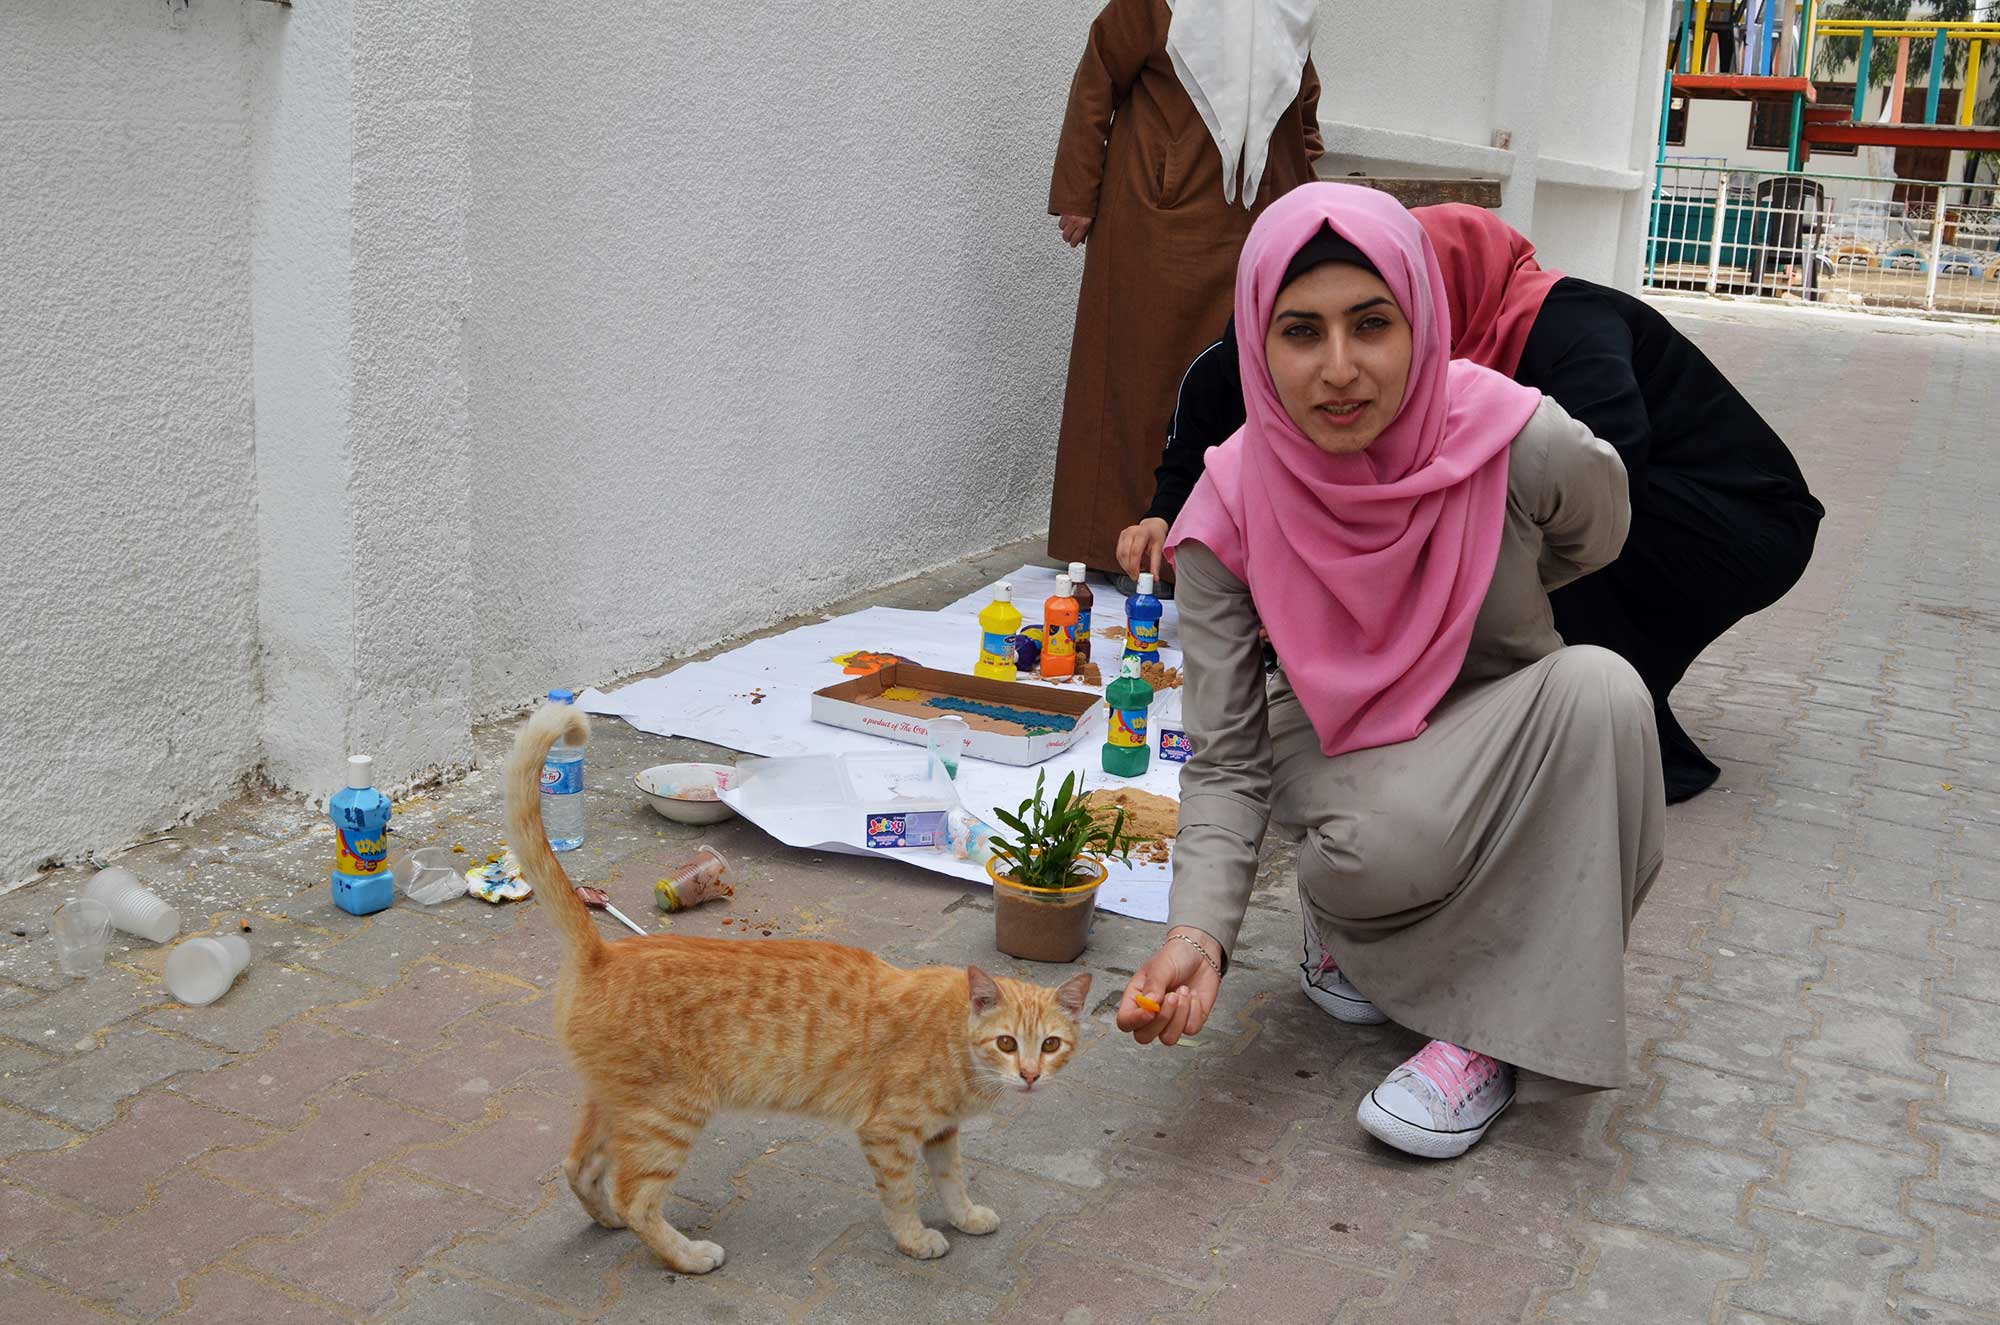 A cat wanders onto the teacher training session and a teacher offers him a healthy snack.